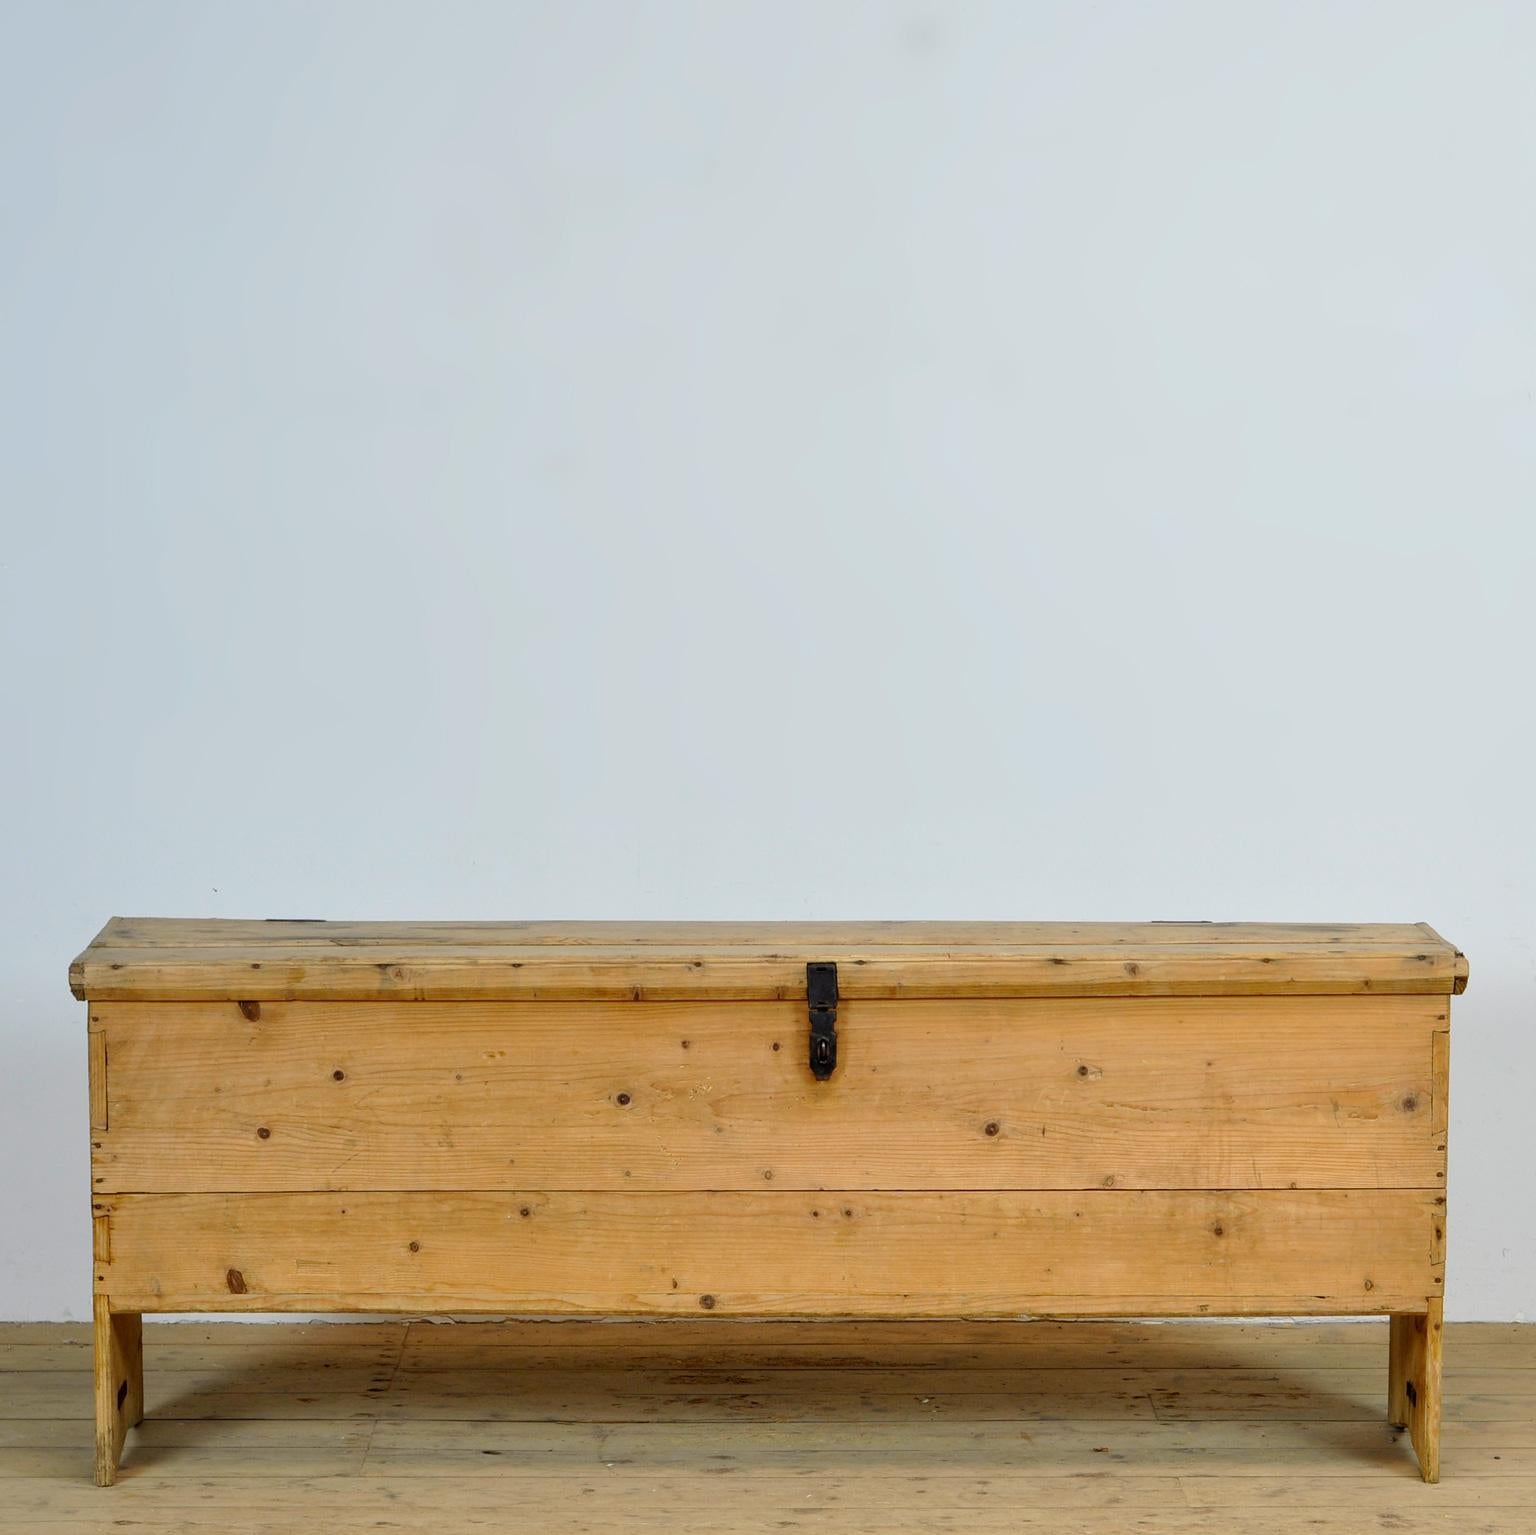 Pine blanket chest from circa 1930. The chest has a simple design but well put together with dovetail joints. To use for storage or for example to put your television on.